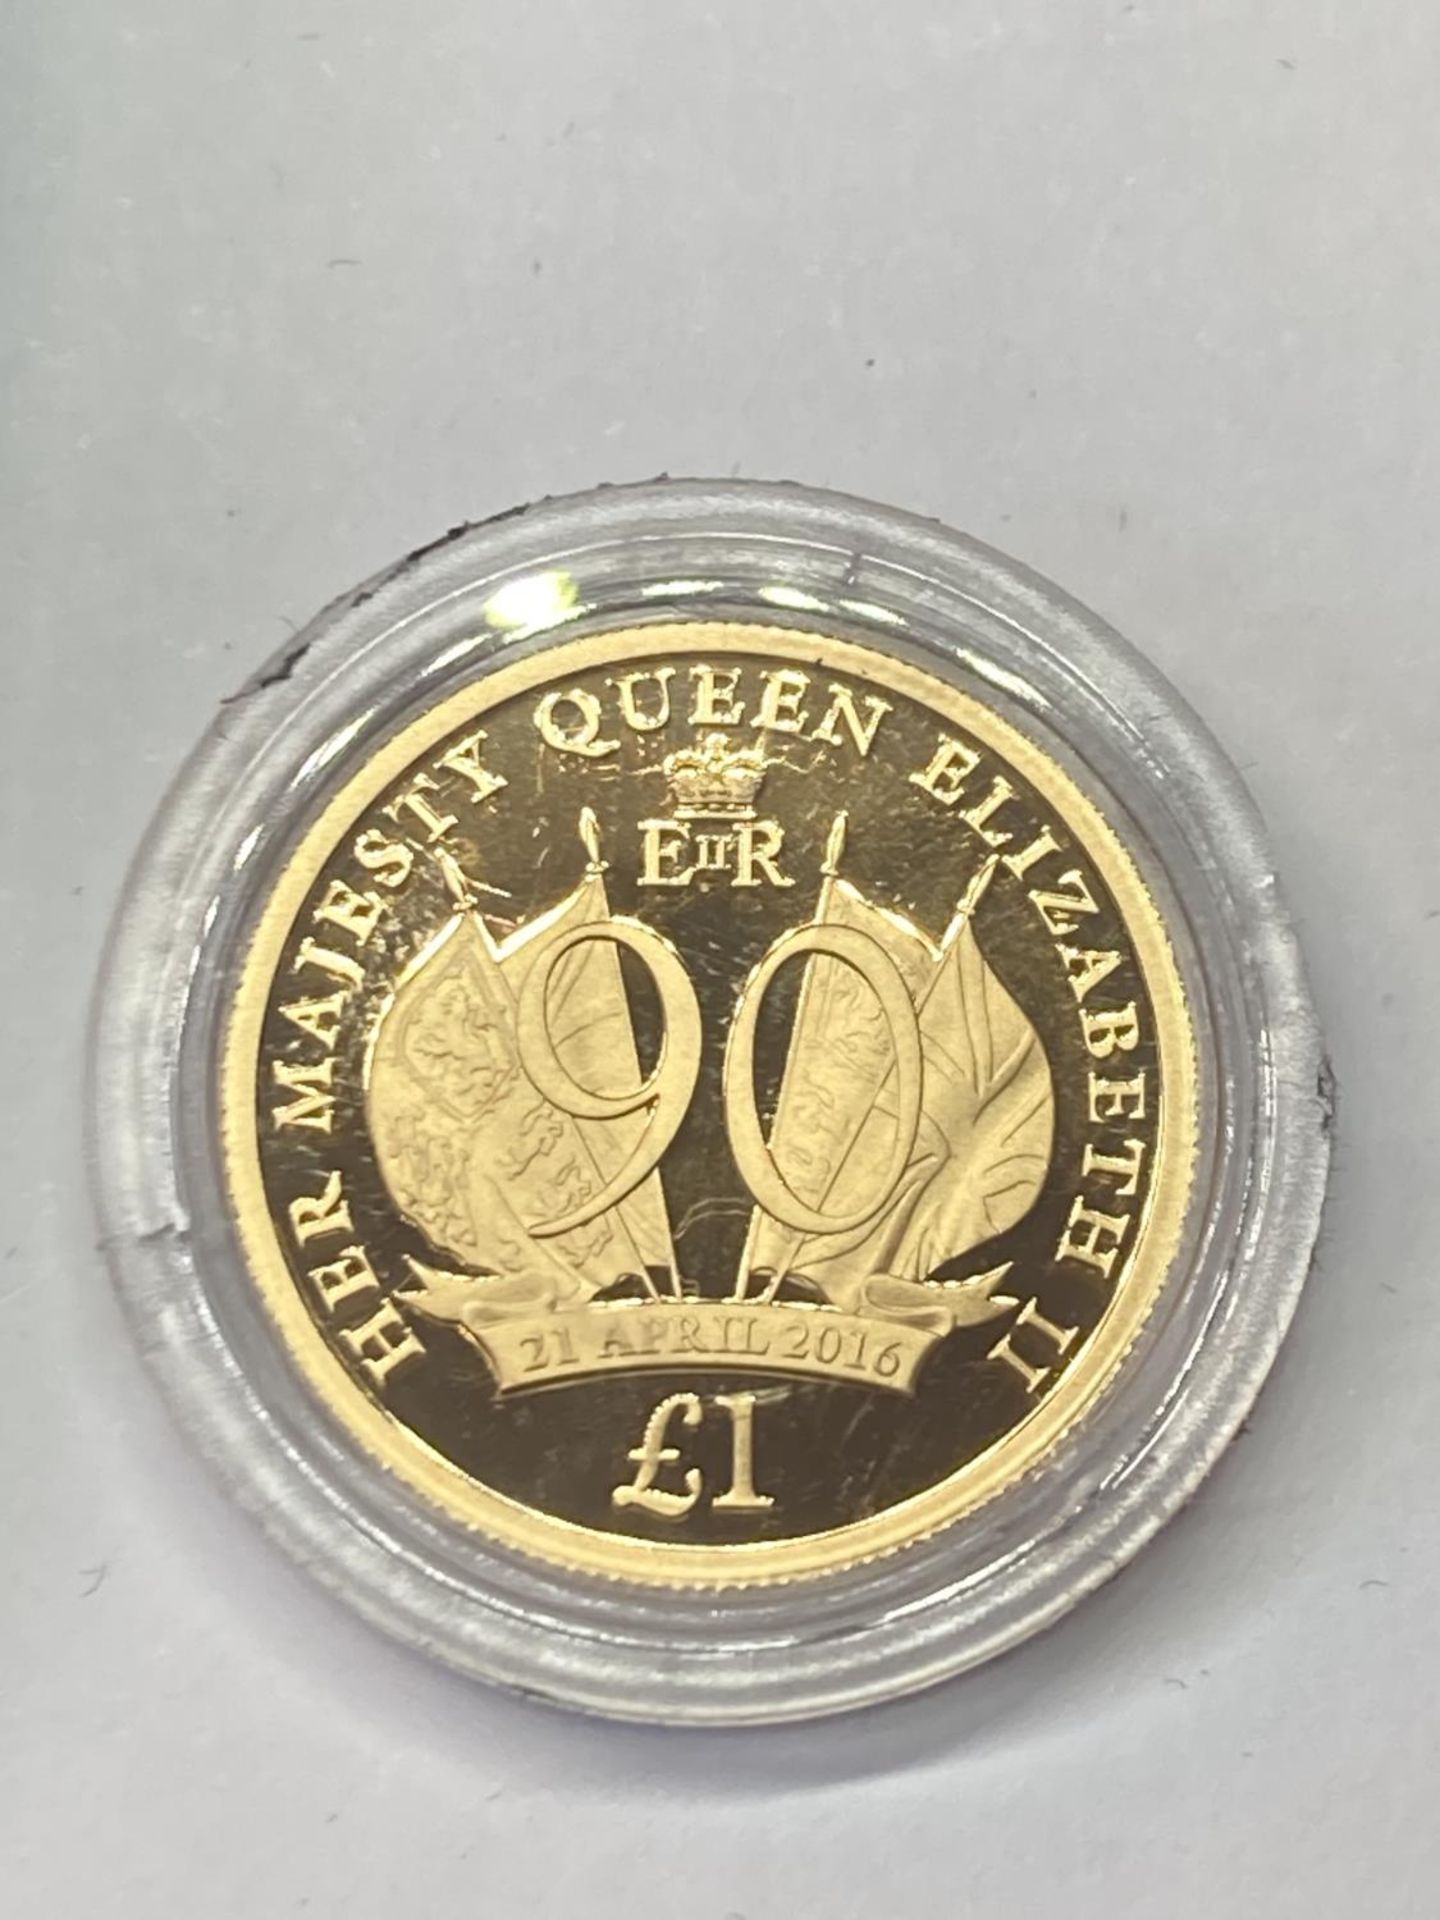 A 2016 QE2 90TH BIRTHDAY JERSEY £1 GOLD PROOF COIN LIMITED EDITION NUMBER 773 OF 995 GROSS WEIGHT - Image 2 of 4